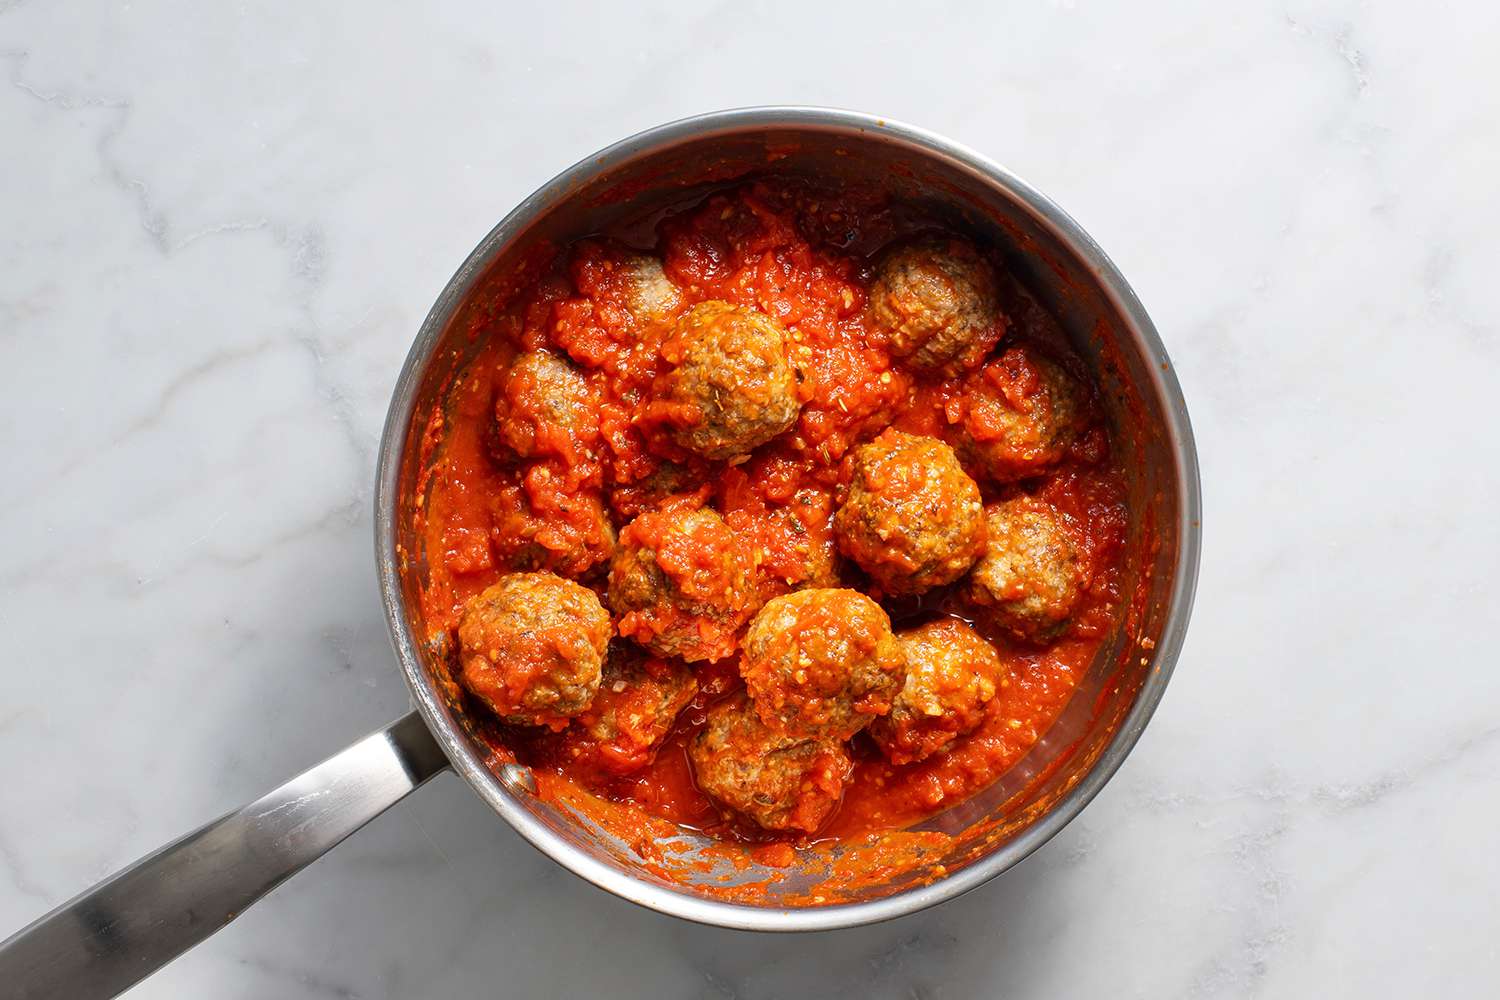 A pot of meatballs in tomato sauce